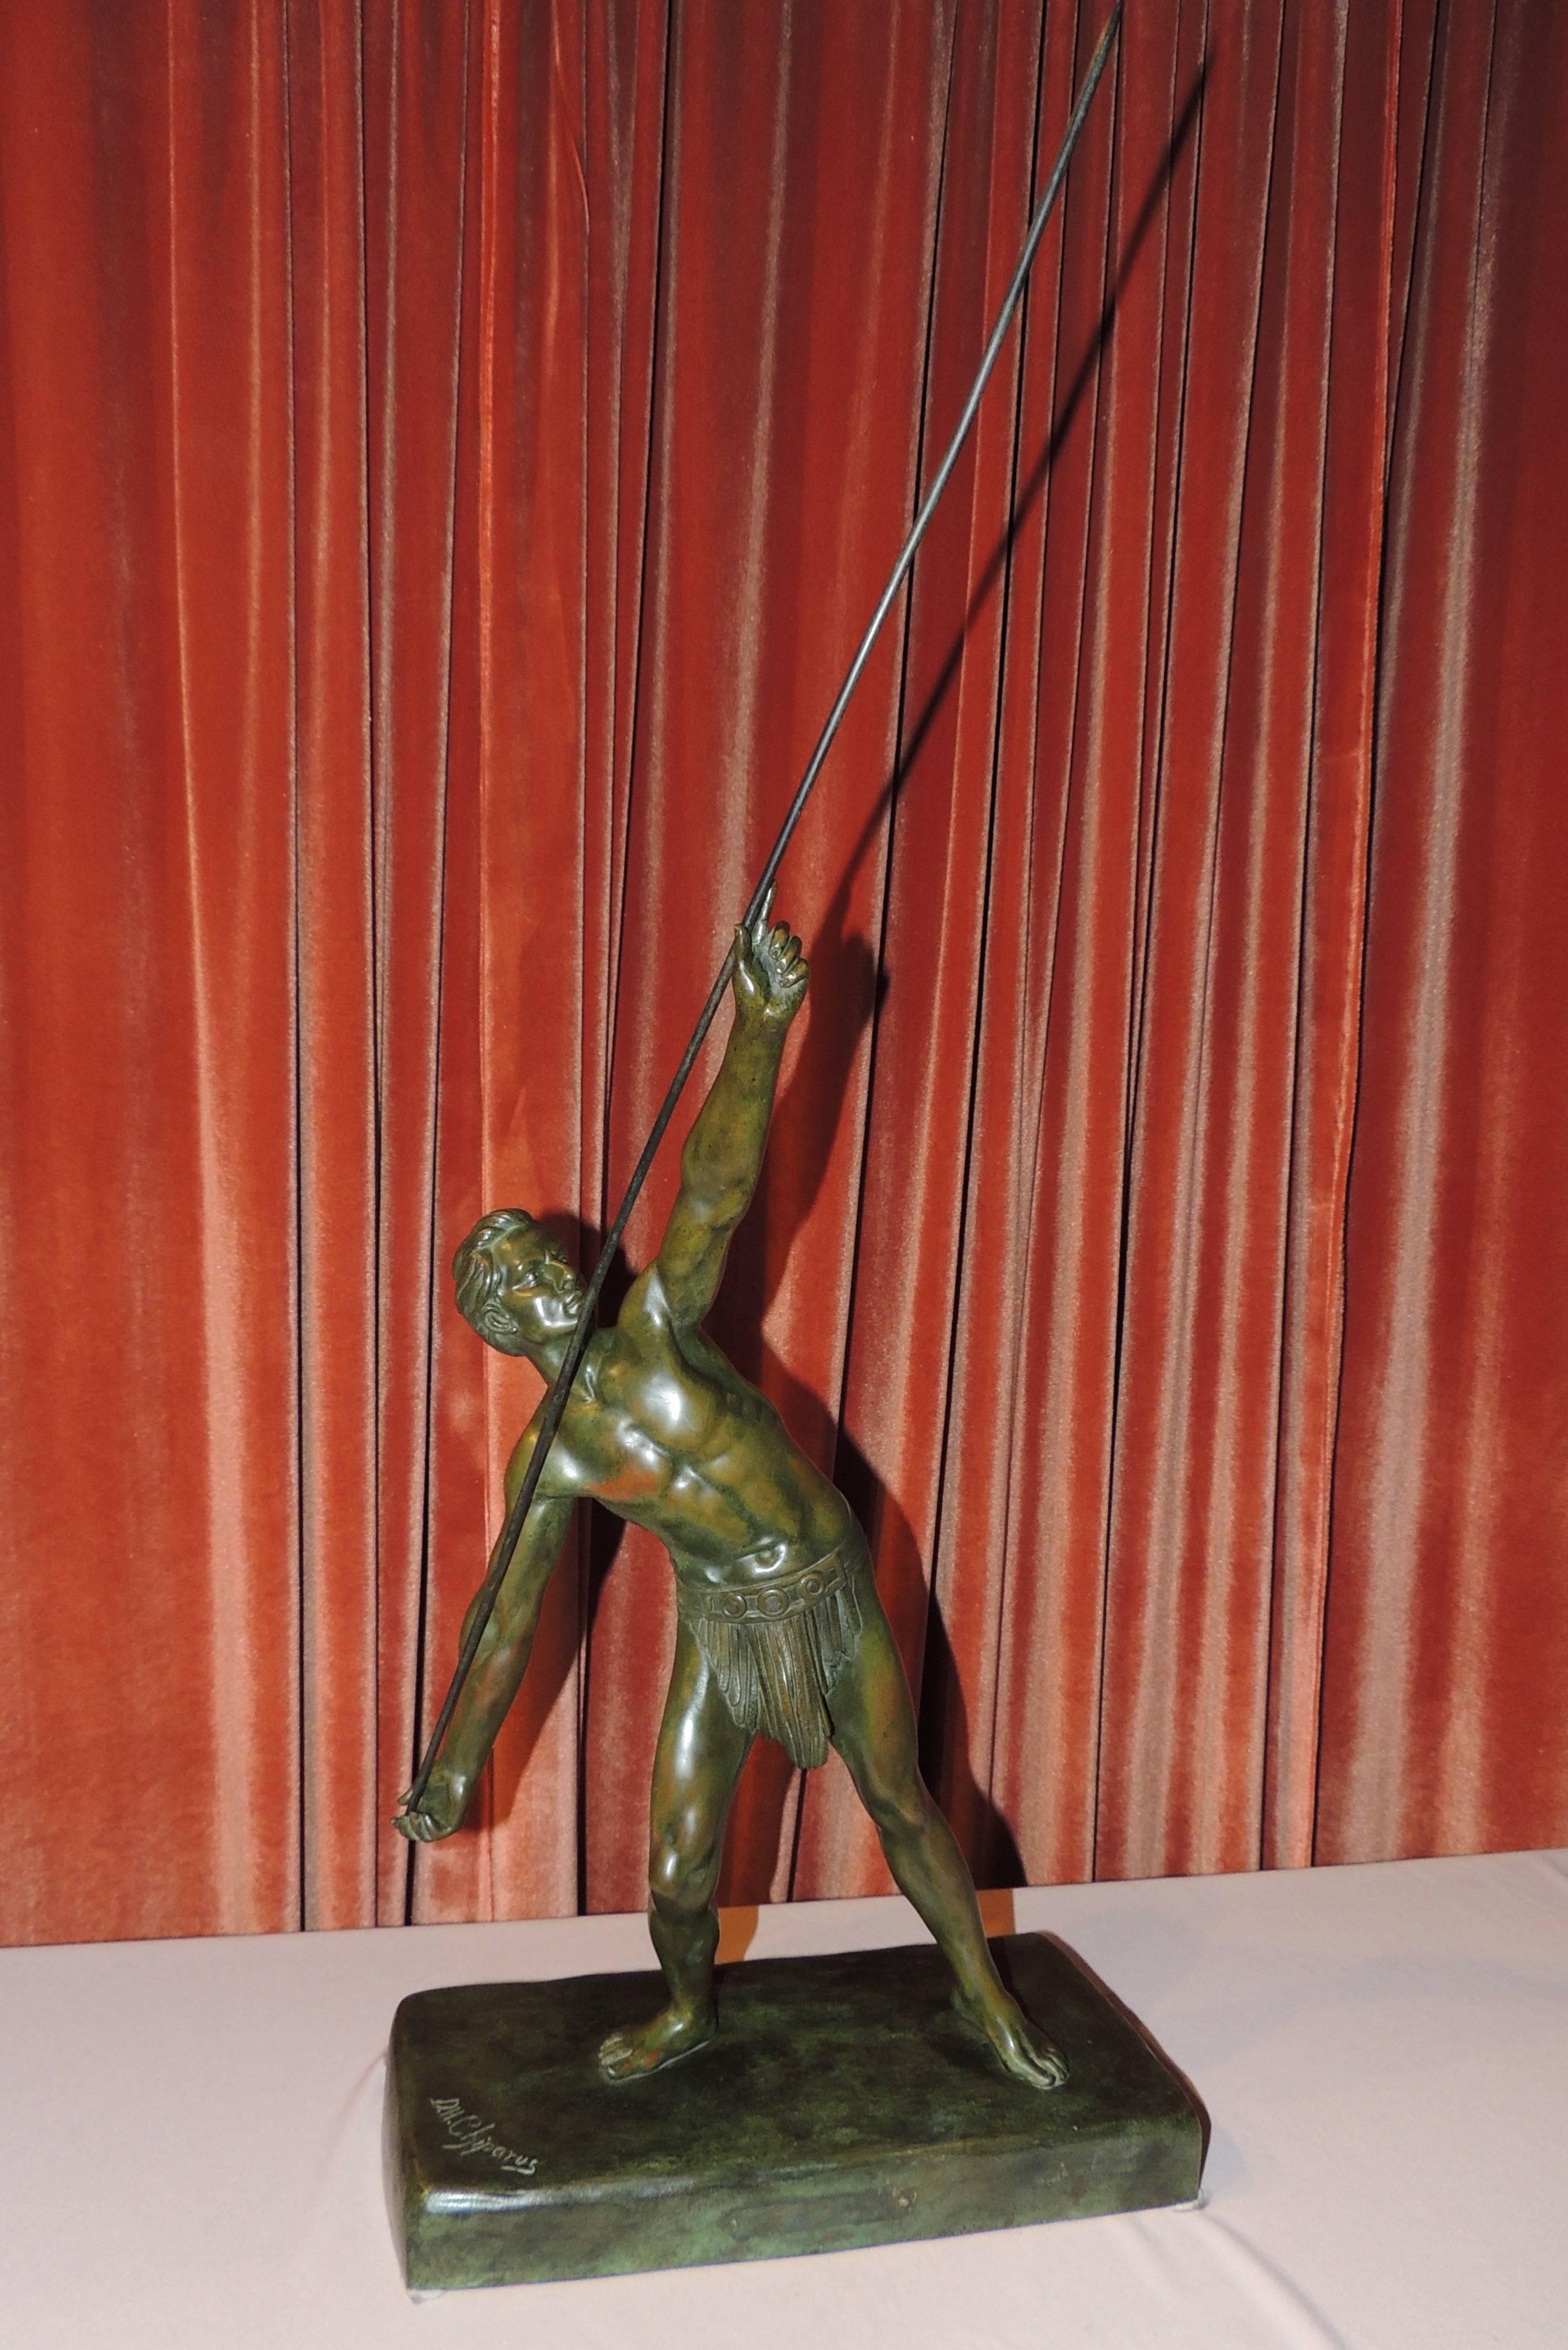 A Classic bronze sculpture by the master of Art Deco statues, Demetre Chiparus. The “Javelin Thrower” has all of the exceptional features that make Chiparus one of the most highly regarded (and collected) sculptors of his time. It features a dynamic